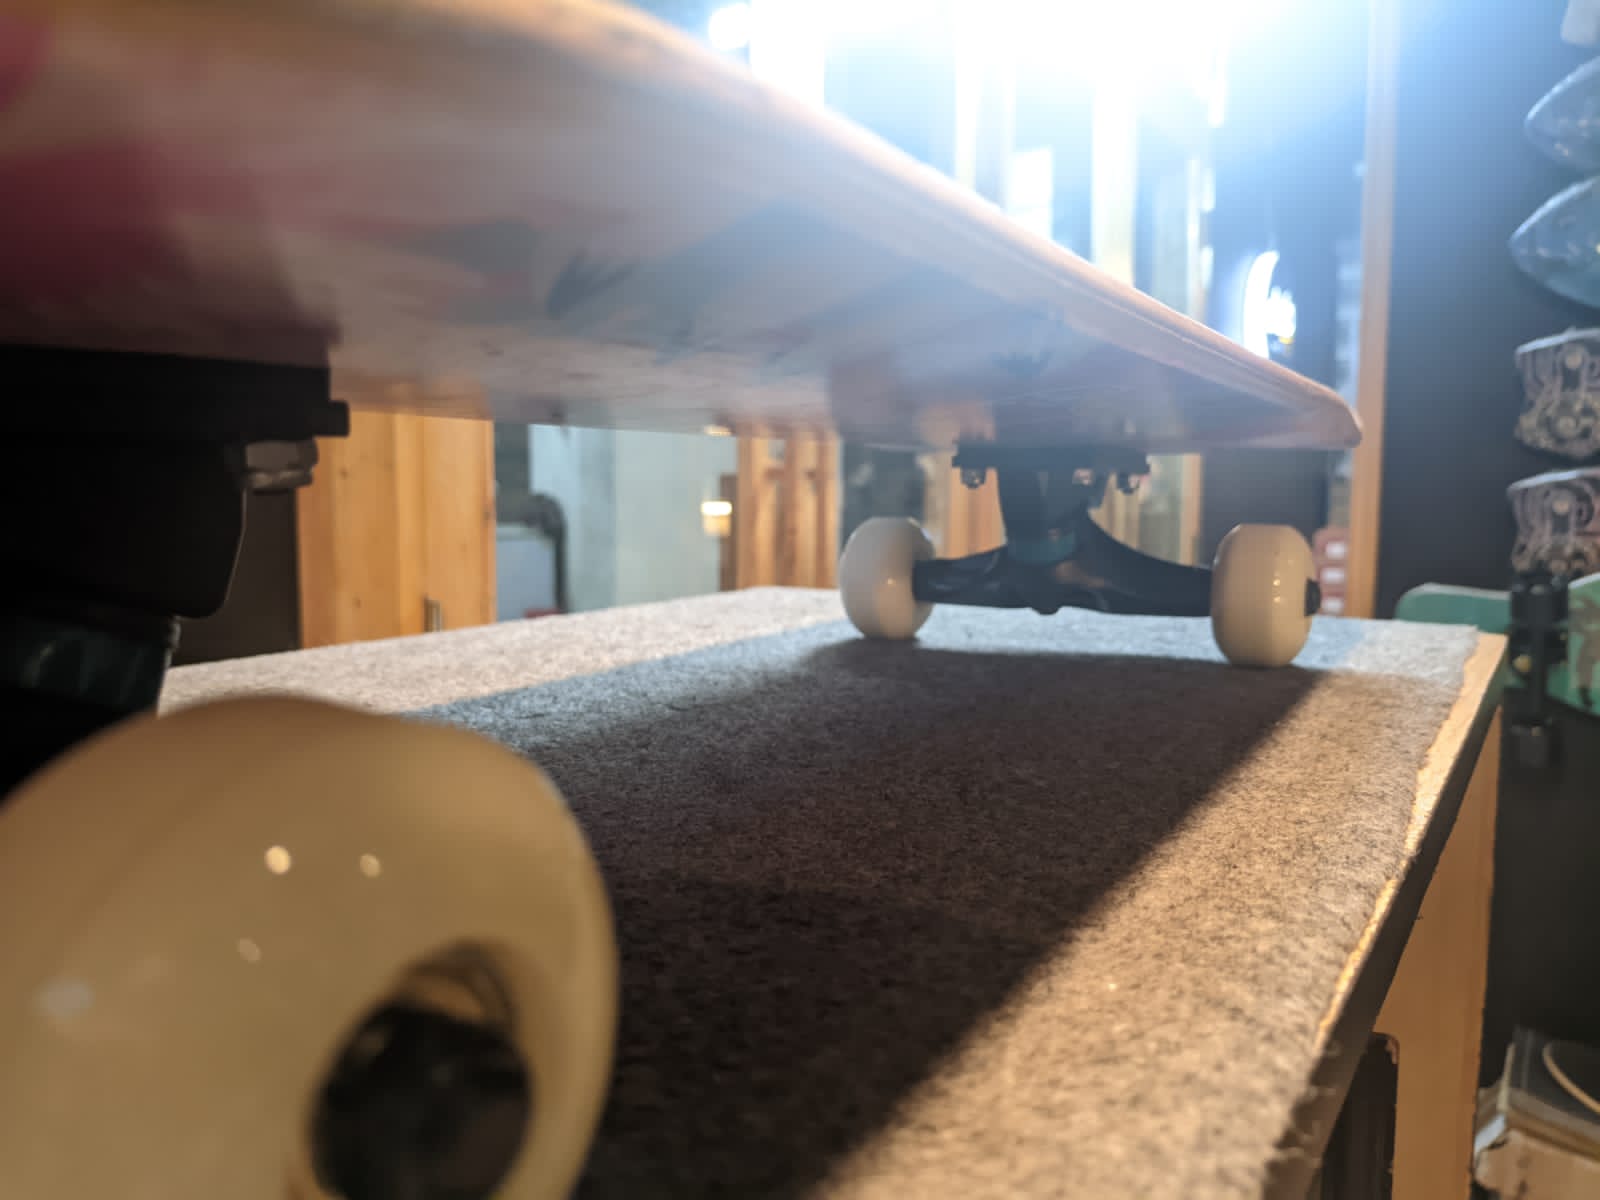 Key Differences between Ripstiks and Skateboards